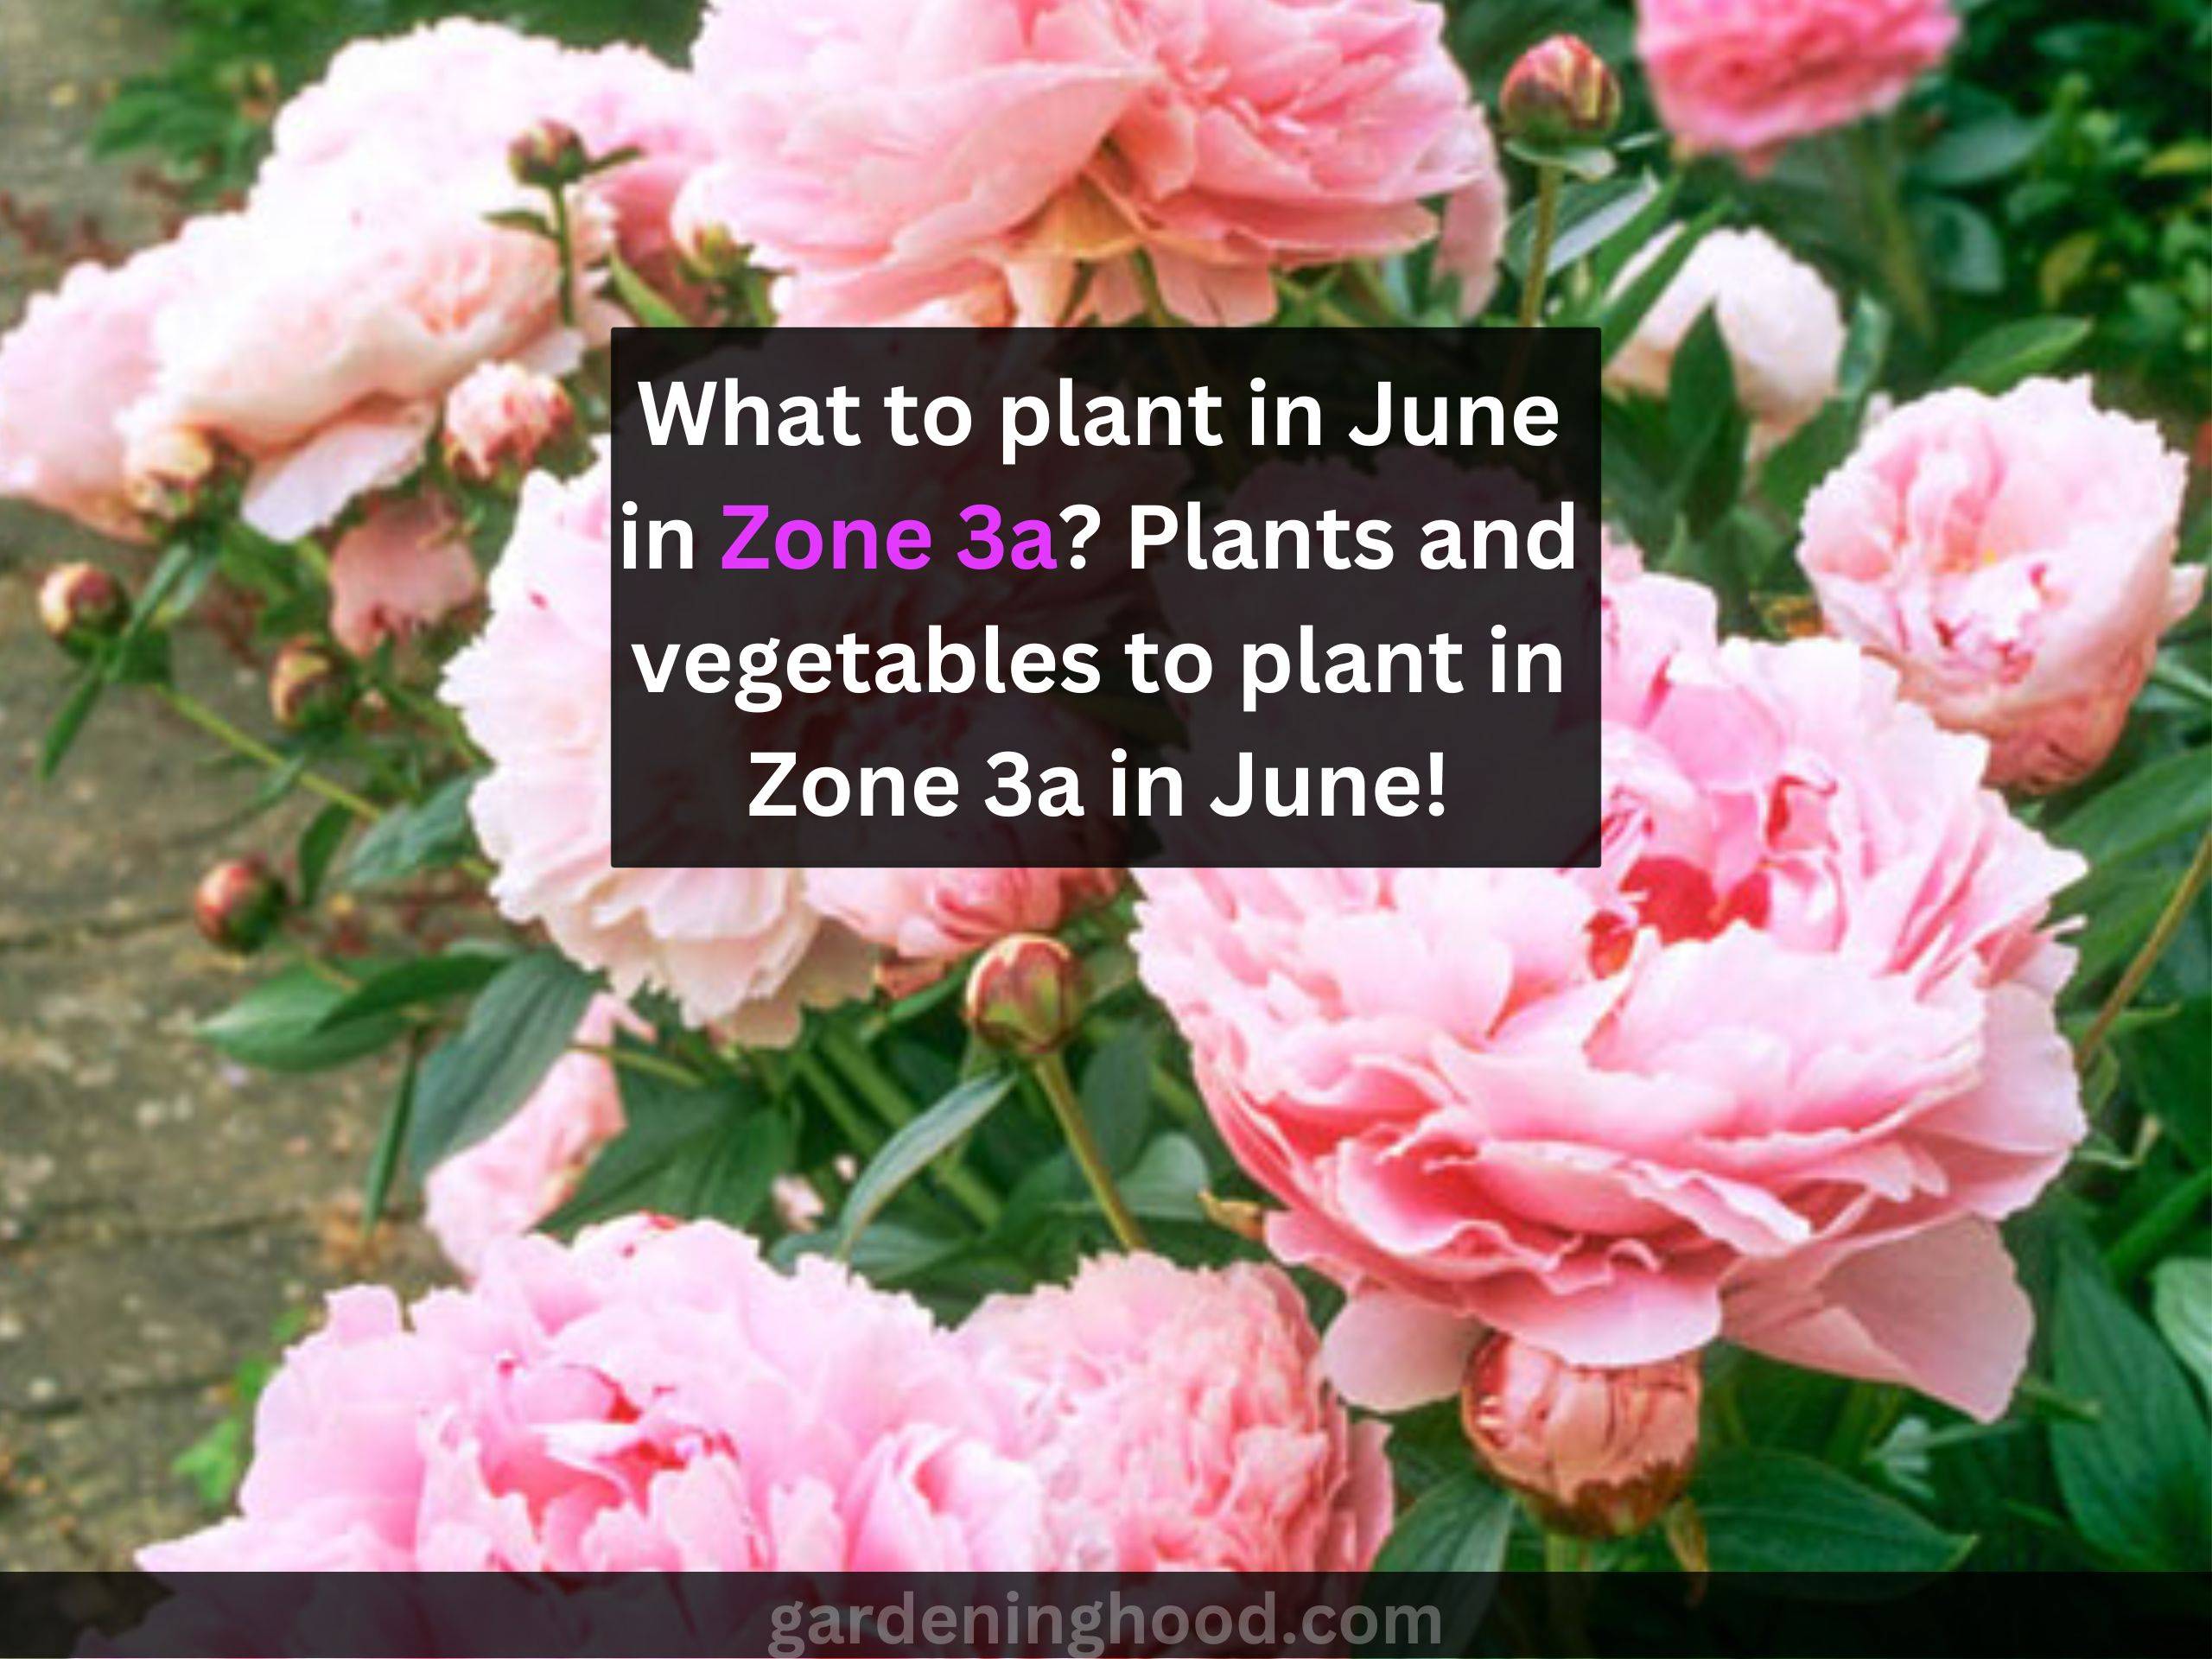 What to plant in June in Zone 3a? Plants and vegetables to plant in Zone 3a in June!